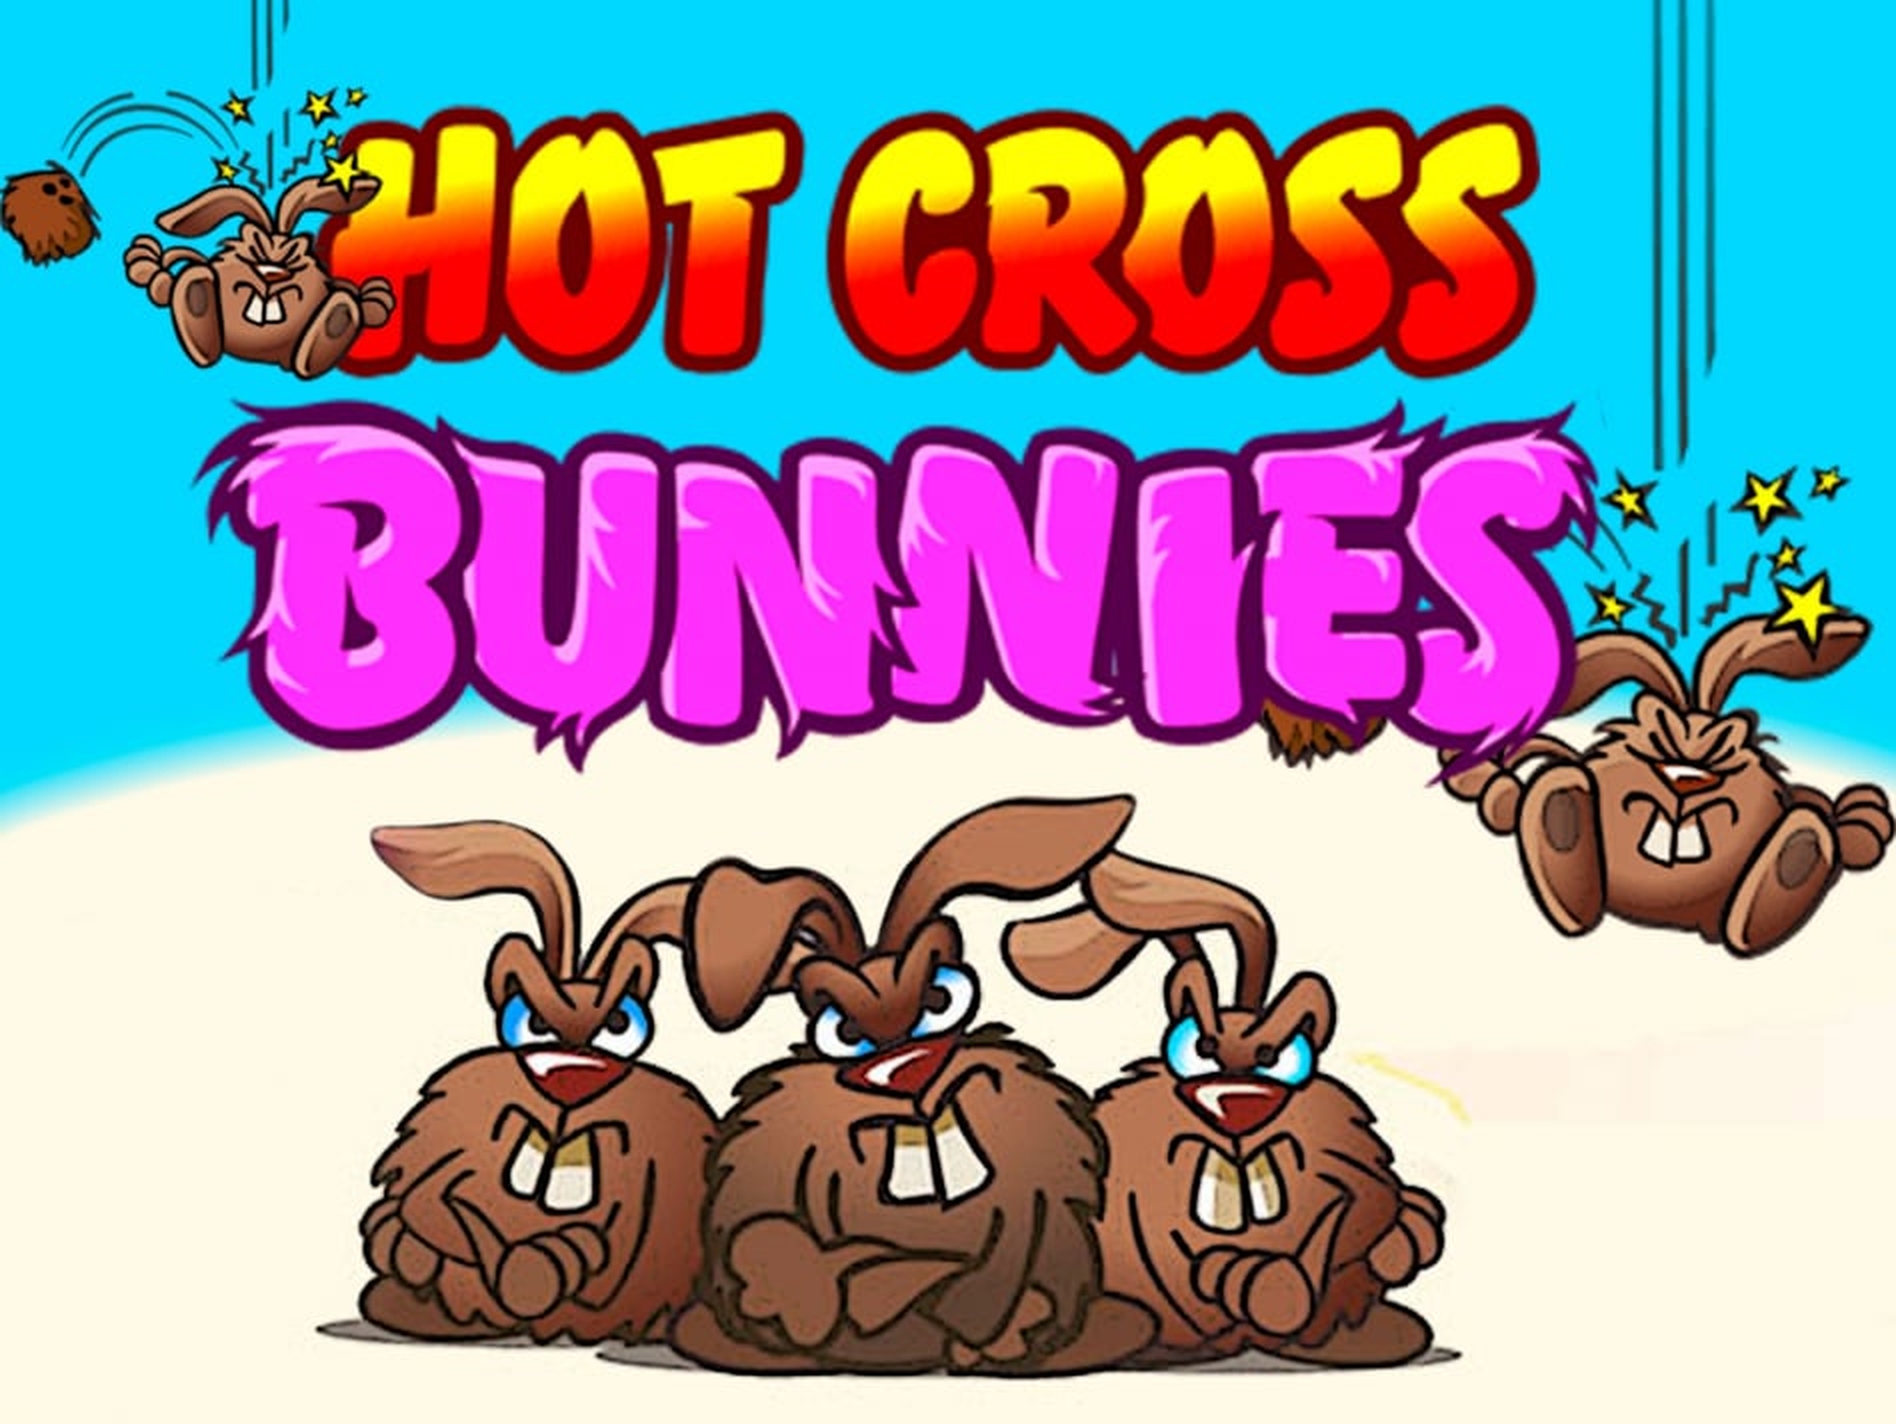 The Hot Cross Bunnies Online Slot Demo Game by Realistic Games